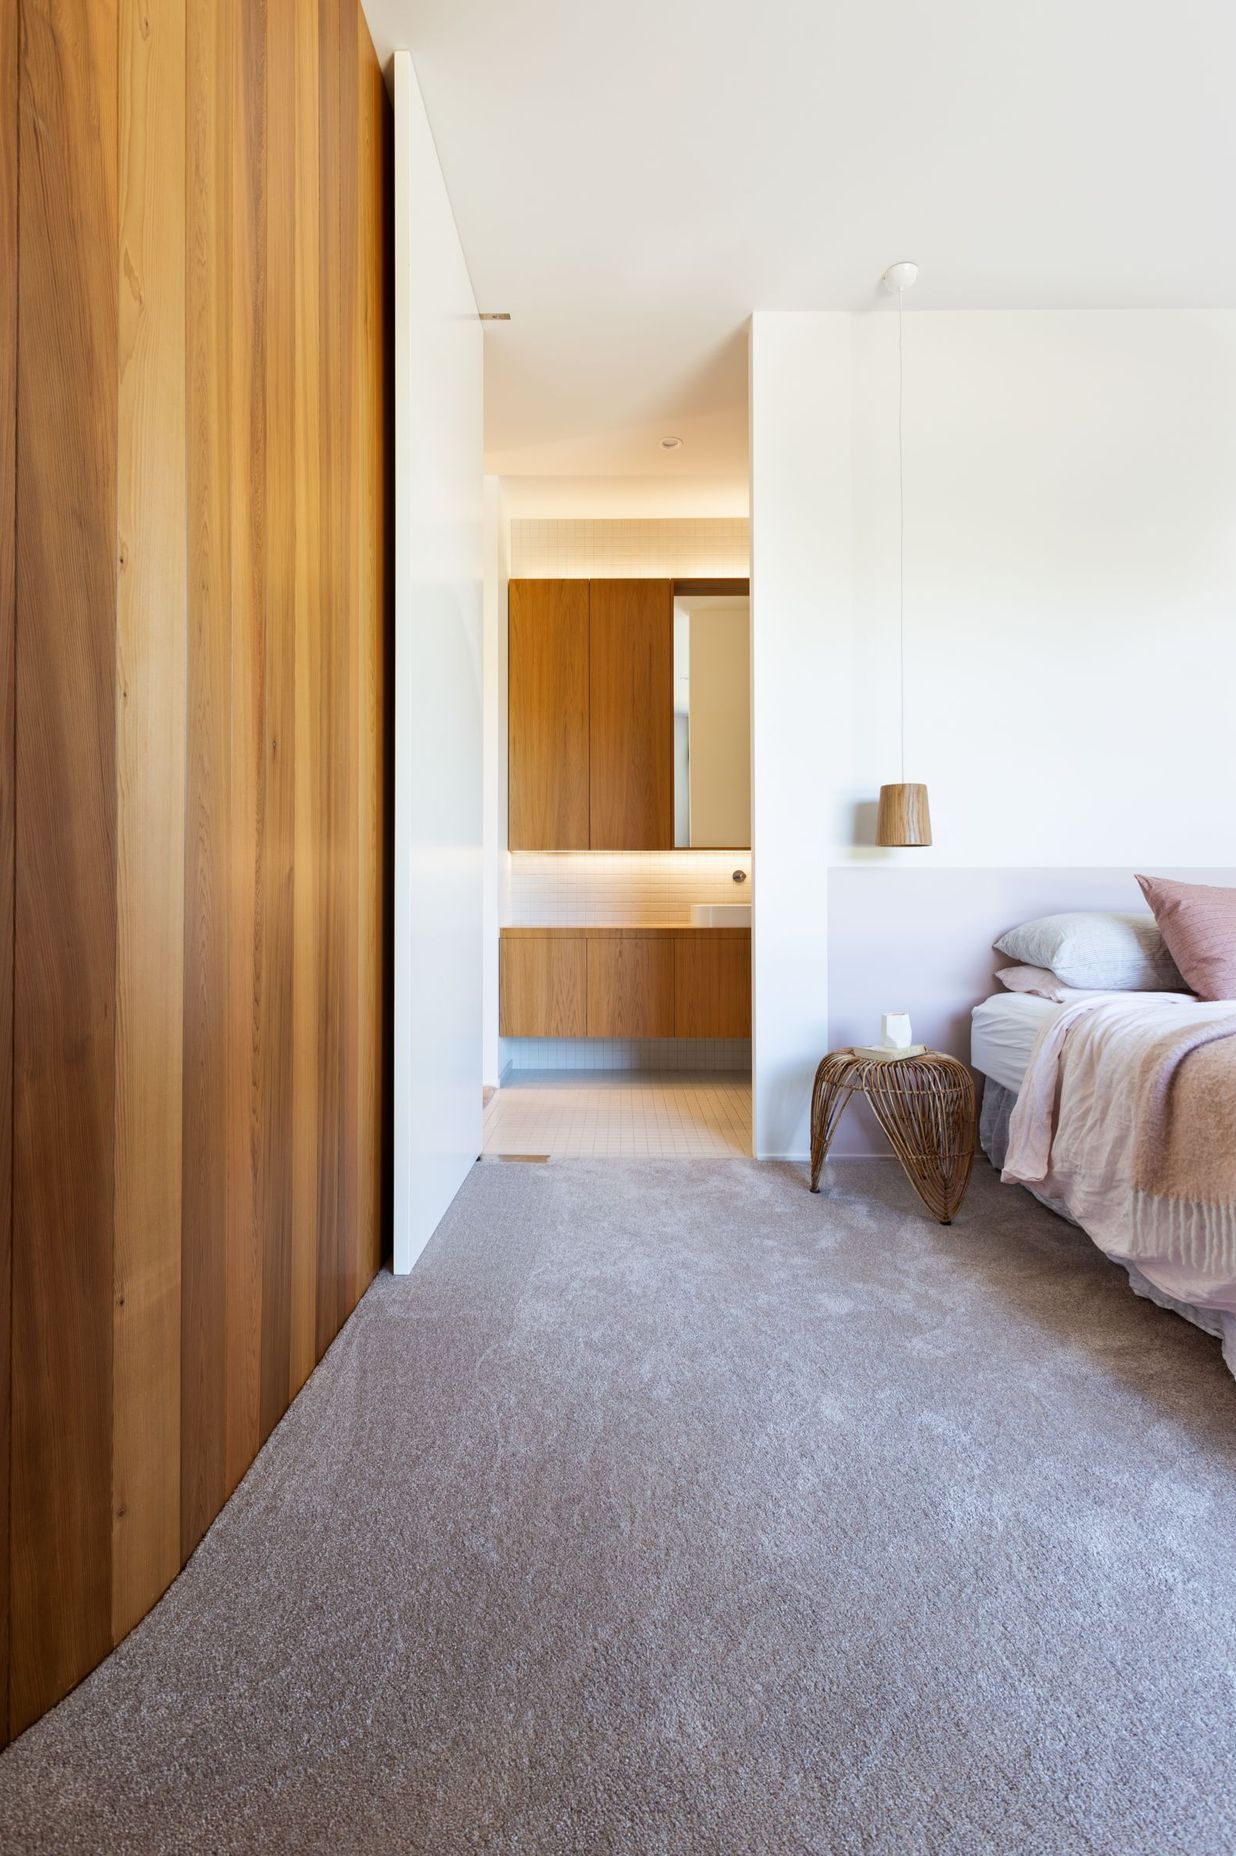 Understated colours and materials continue into the master bedroom.